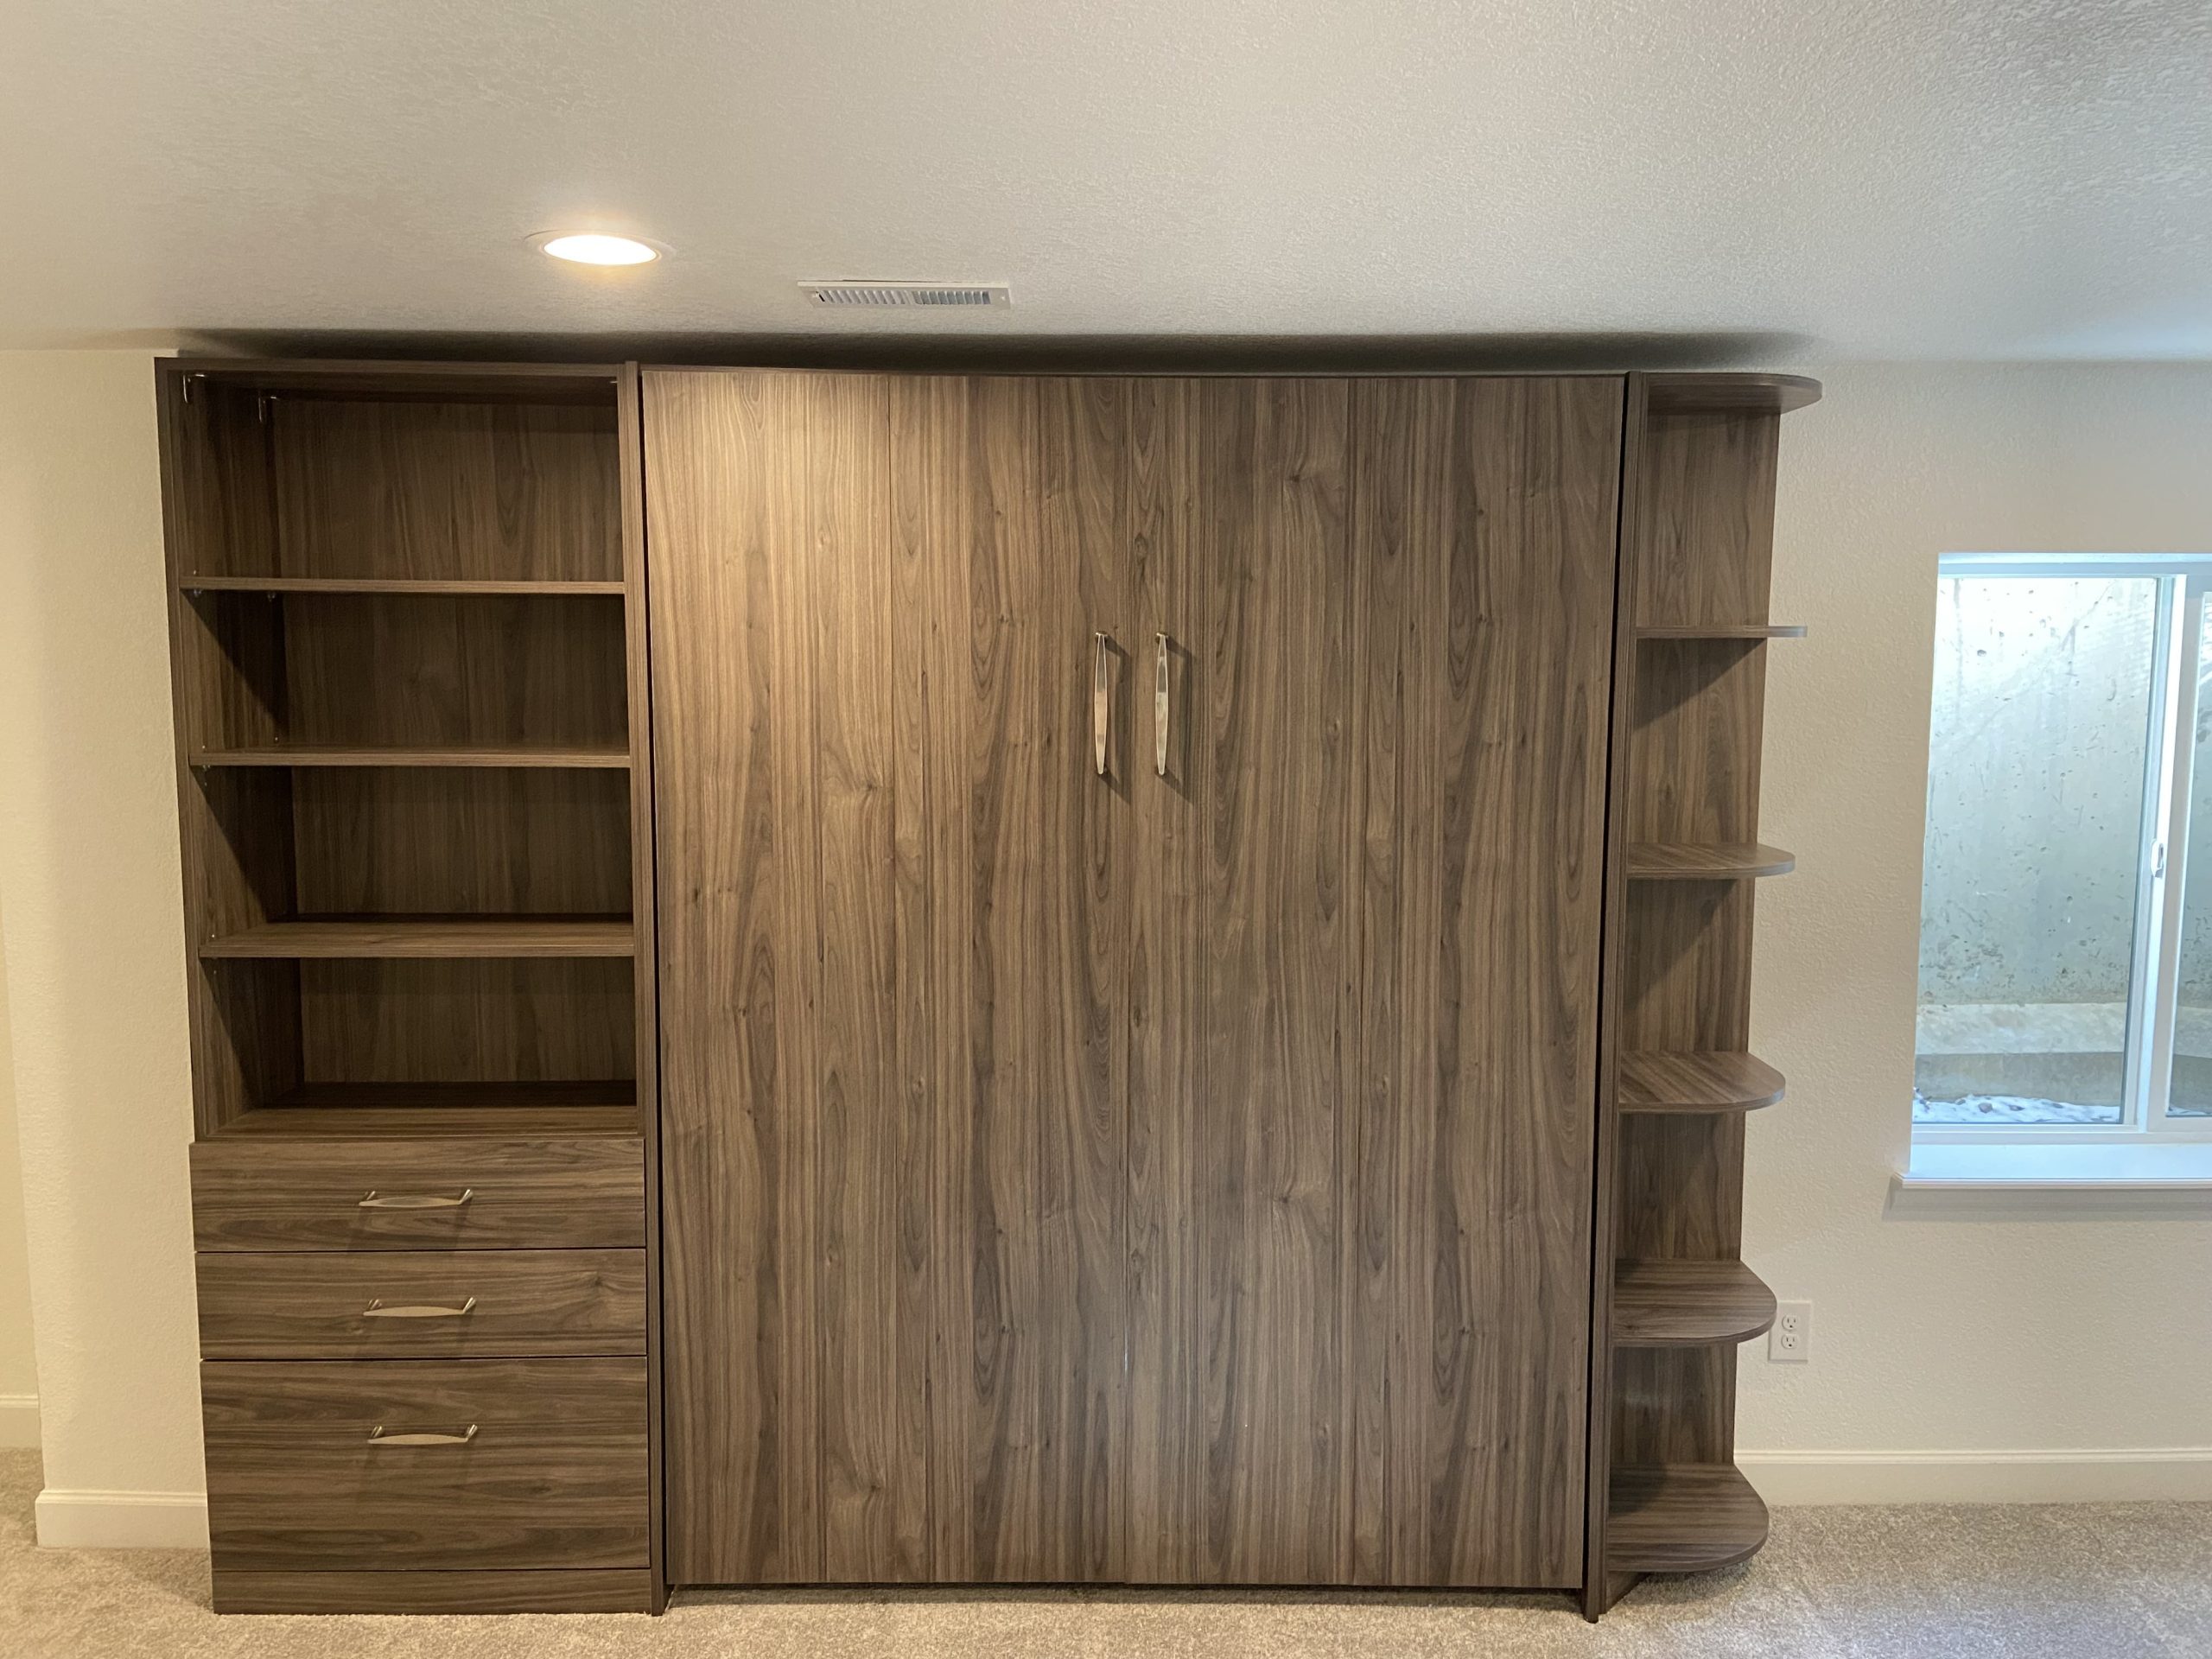 Canadian-Queen-Murphy-Bed-with-cabinets-basement-min